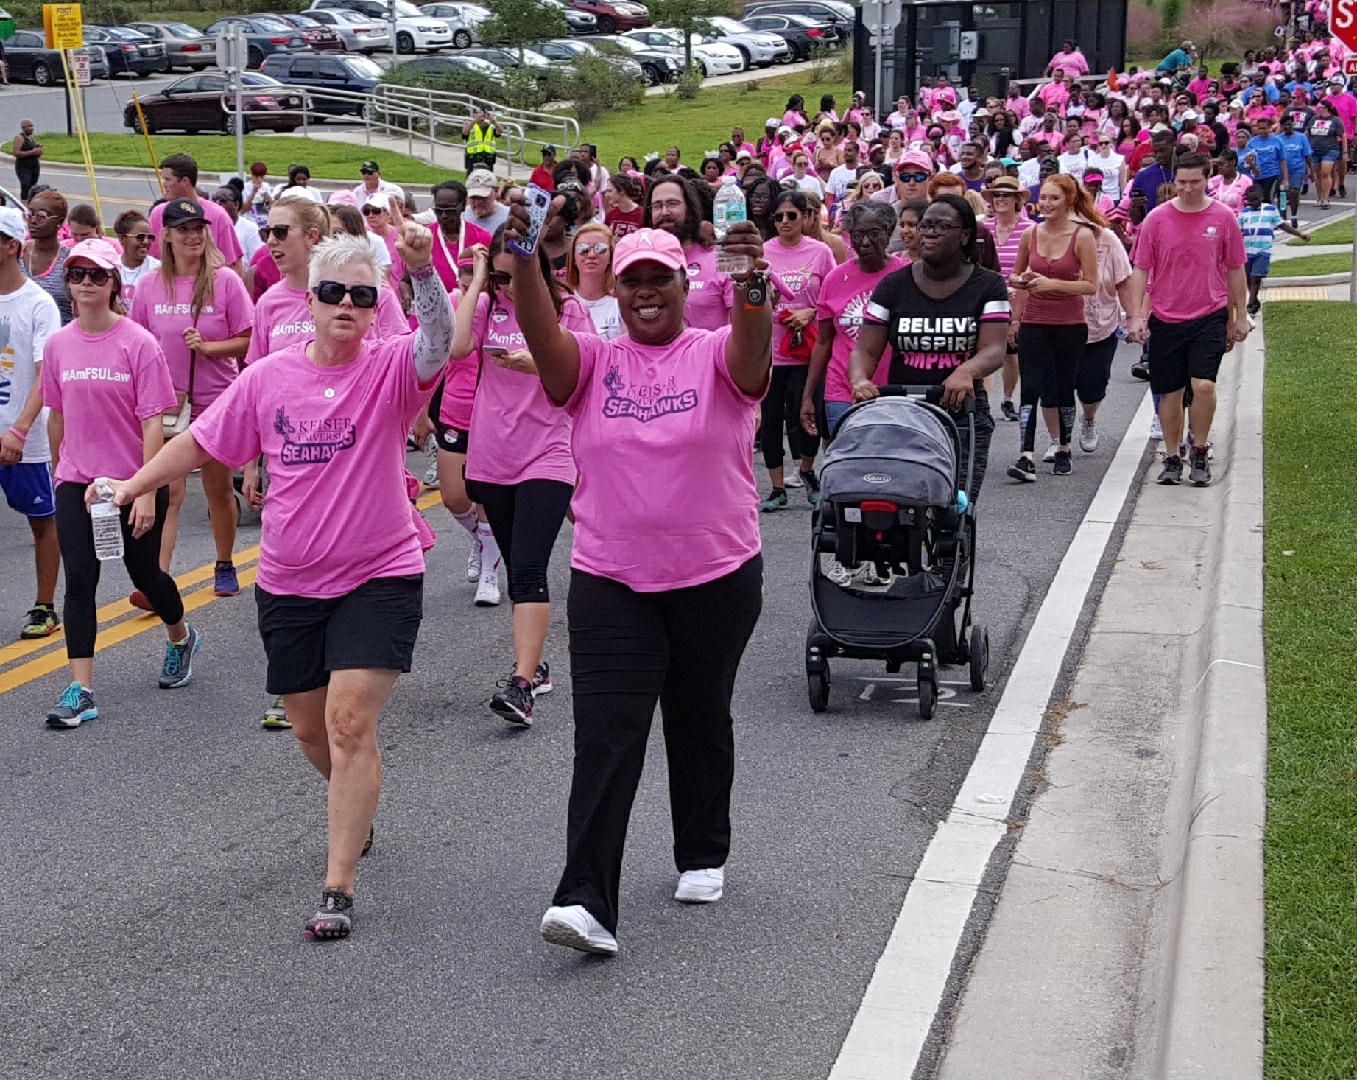 Tallahassee Participates in Making Strides Against Breast Cancer Walk